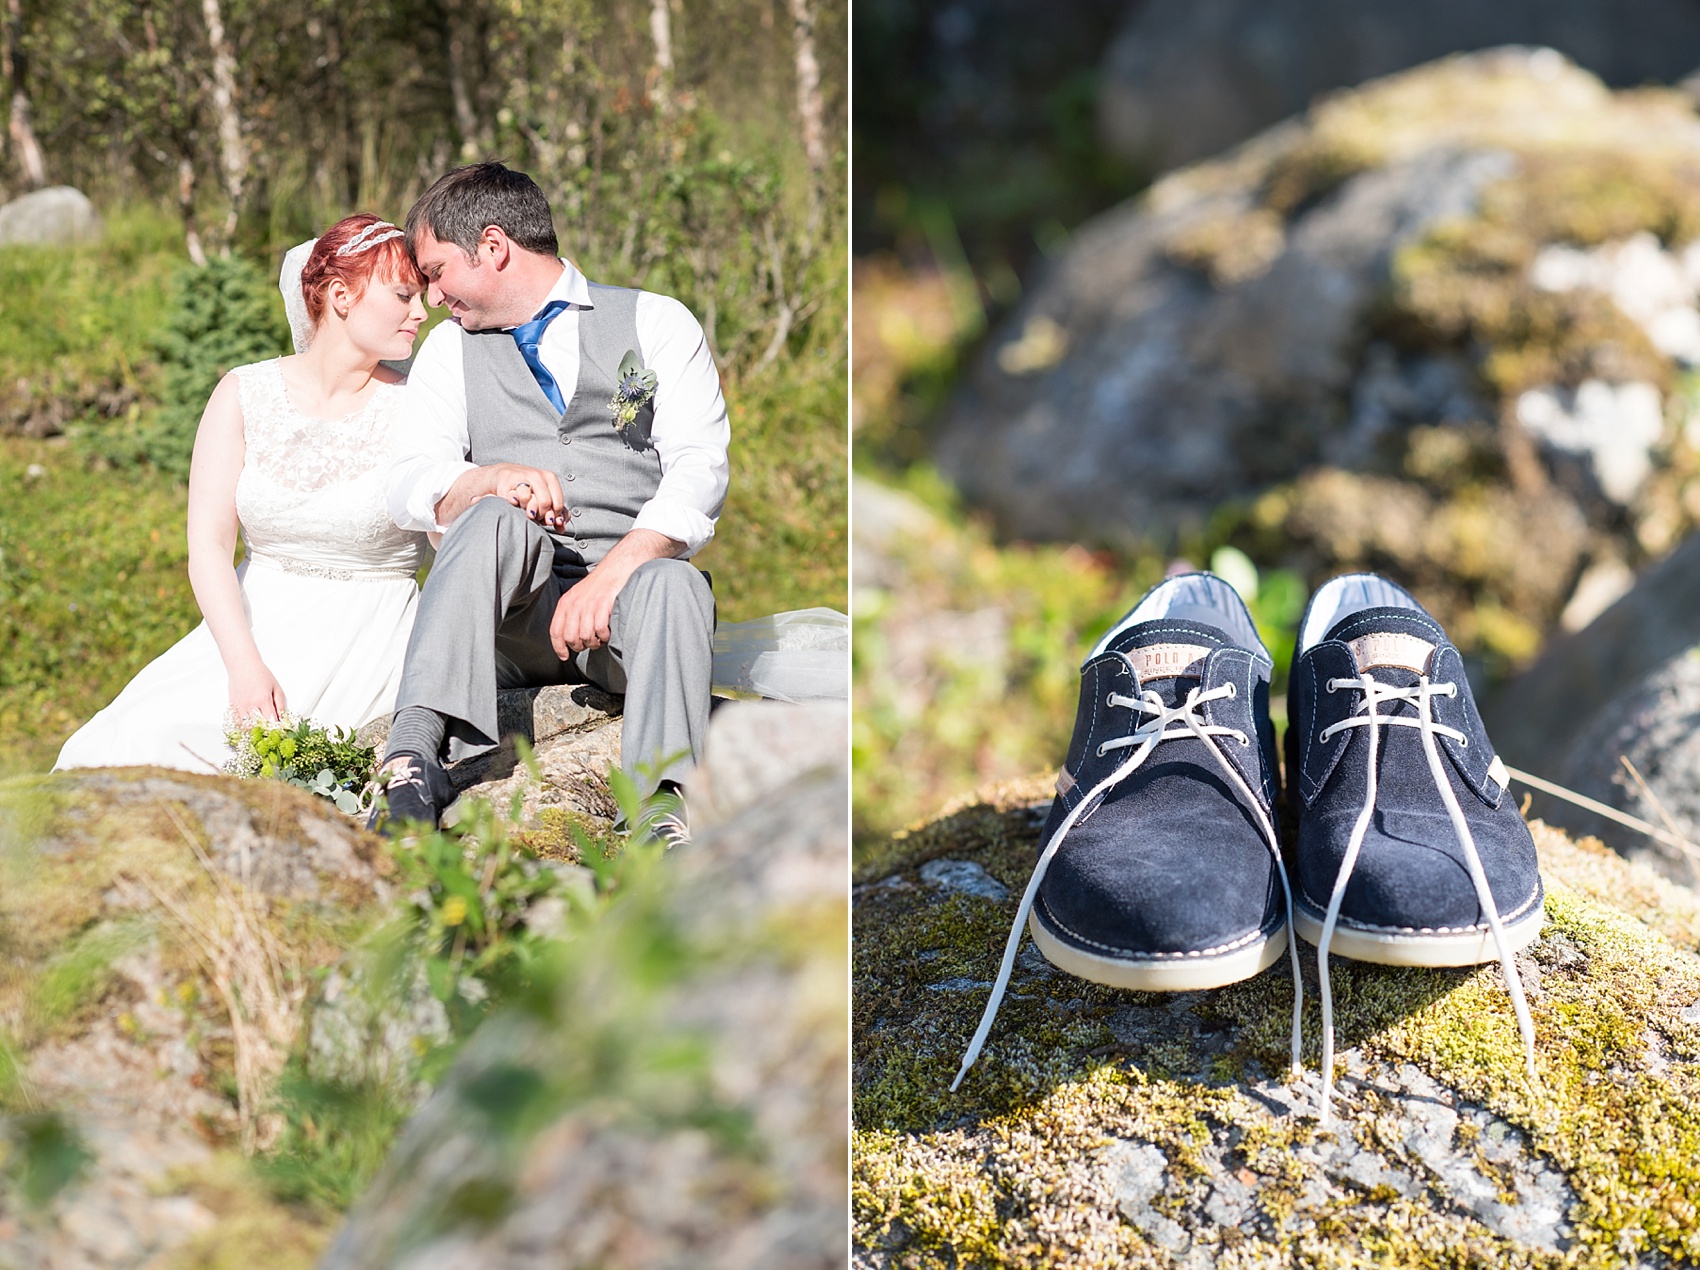 Norway wedding photos by Mikkel Paige Photography, destination wedding photographer. Bride and groom photo and blue suede shoes.